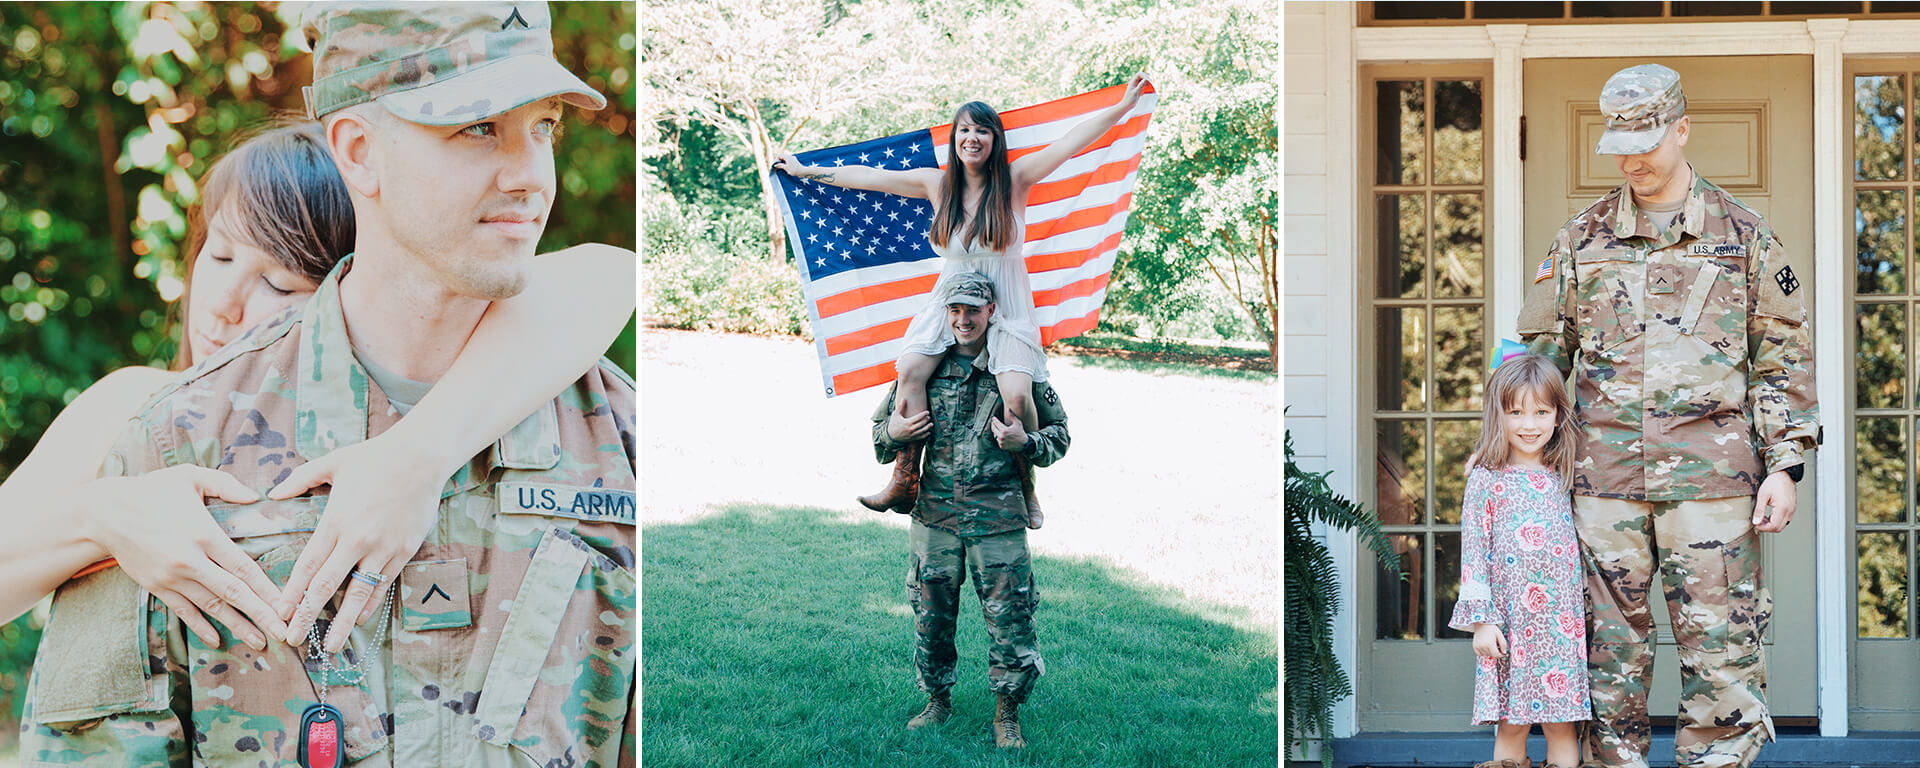 Capital One provides spousal support to military families while her military husband is on deployment.